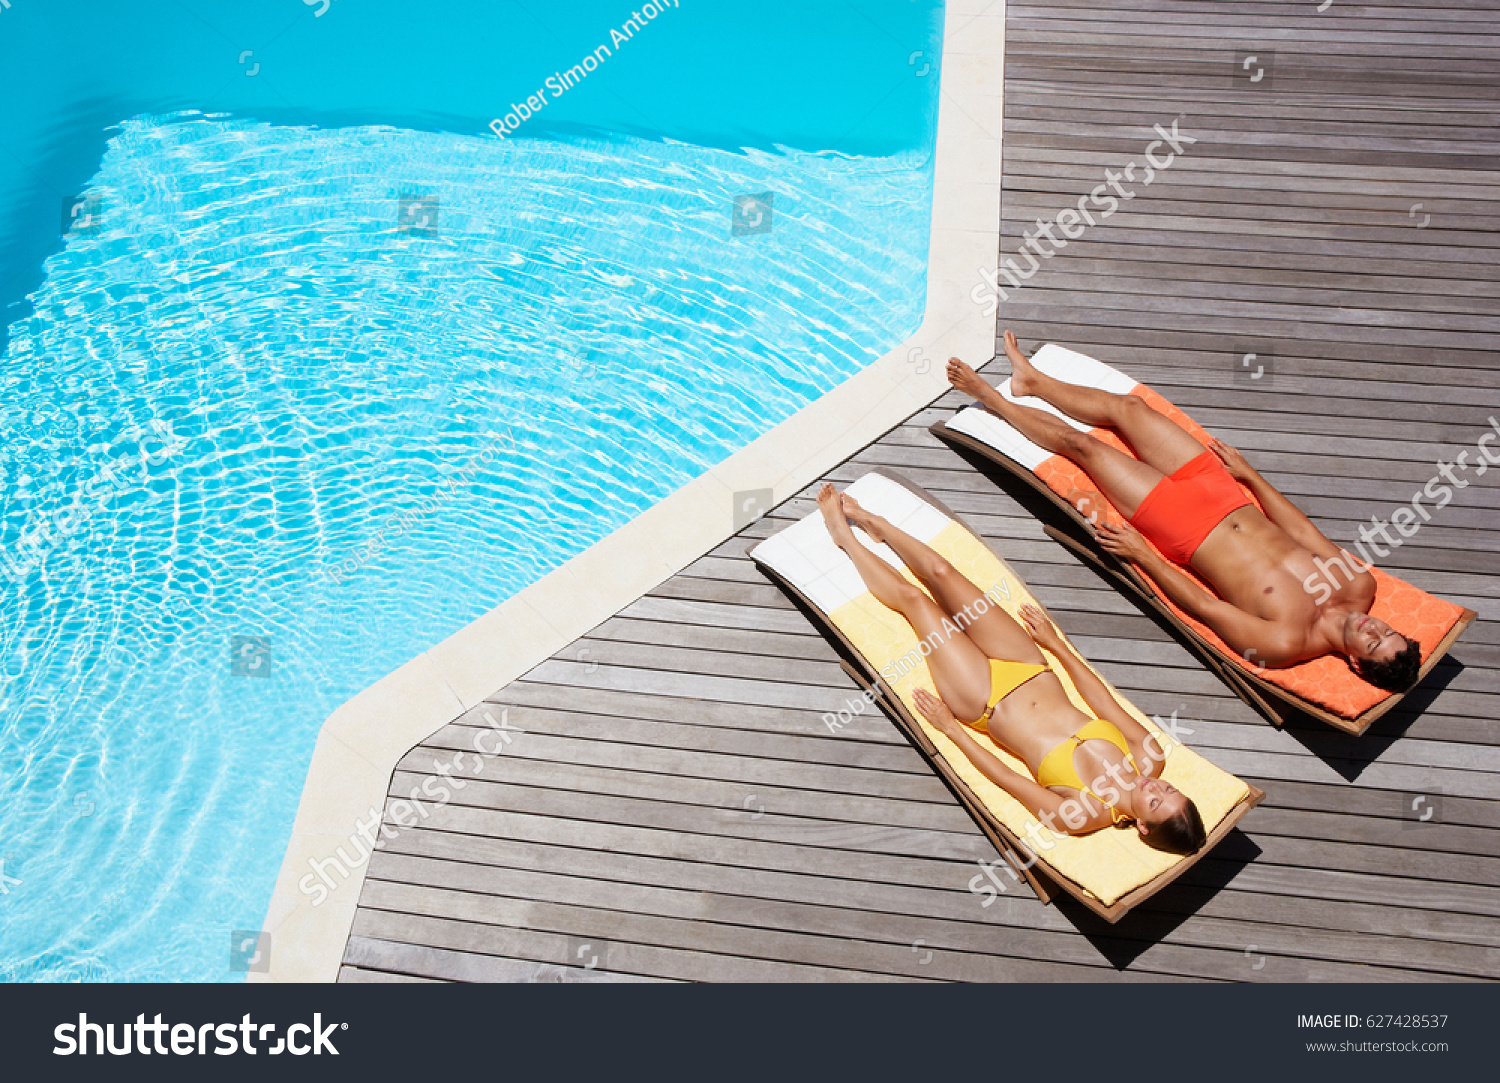 Full length of a young couple resting on sun loungers by swimming pool #627428537